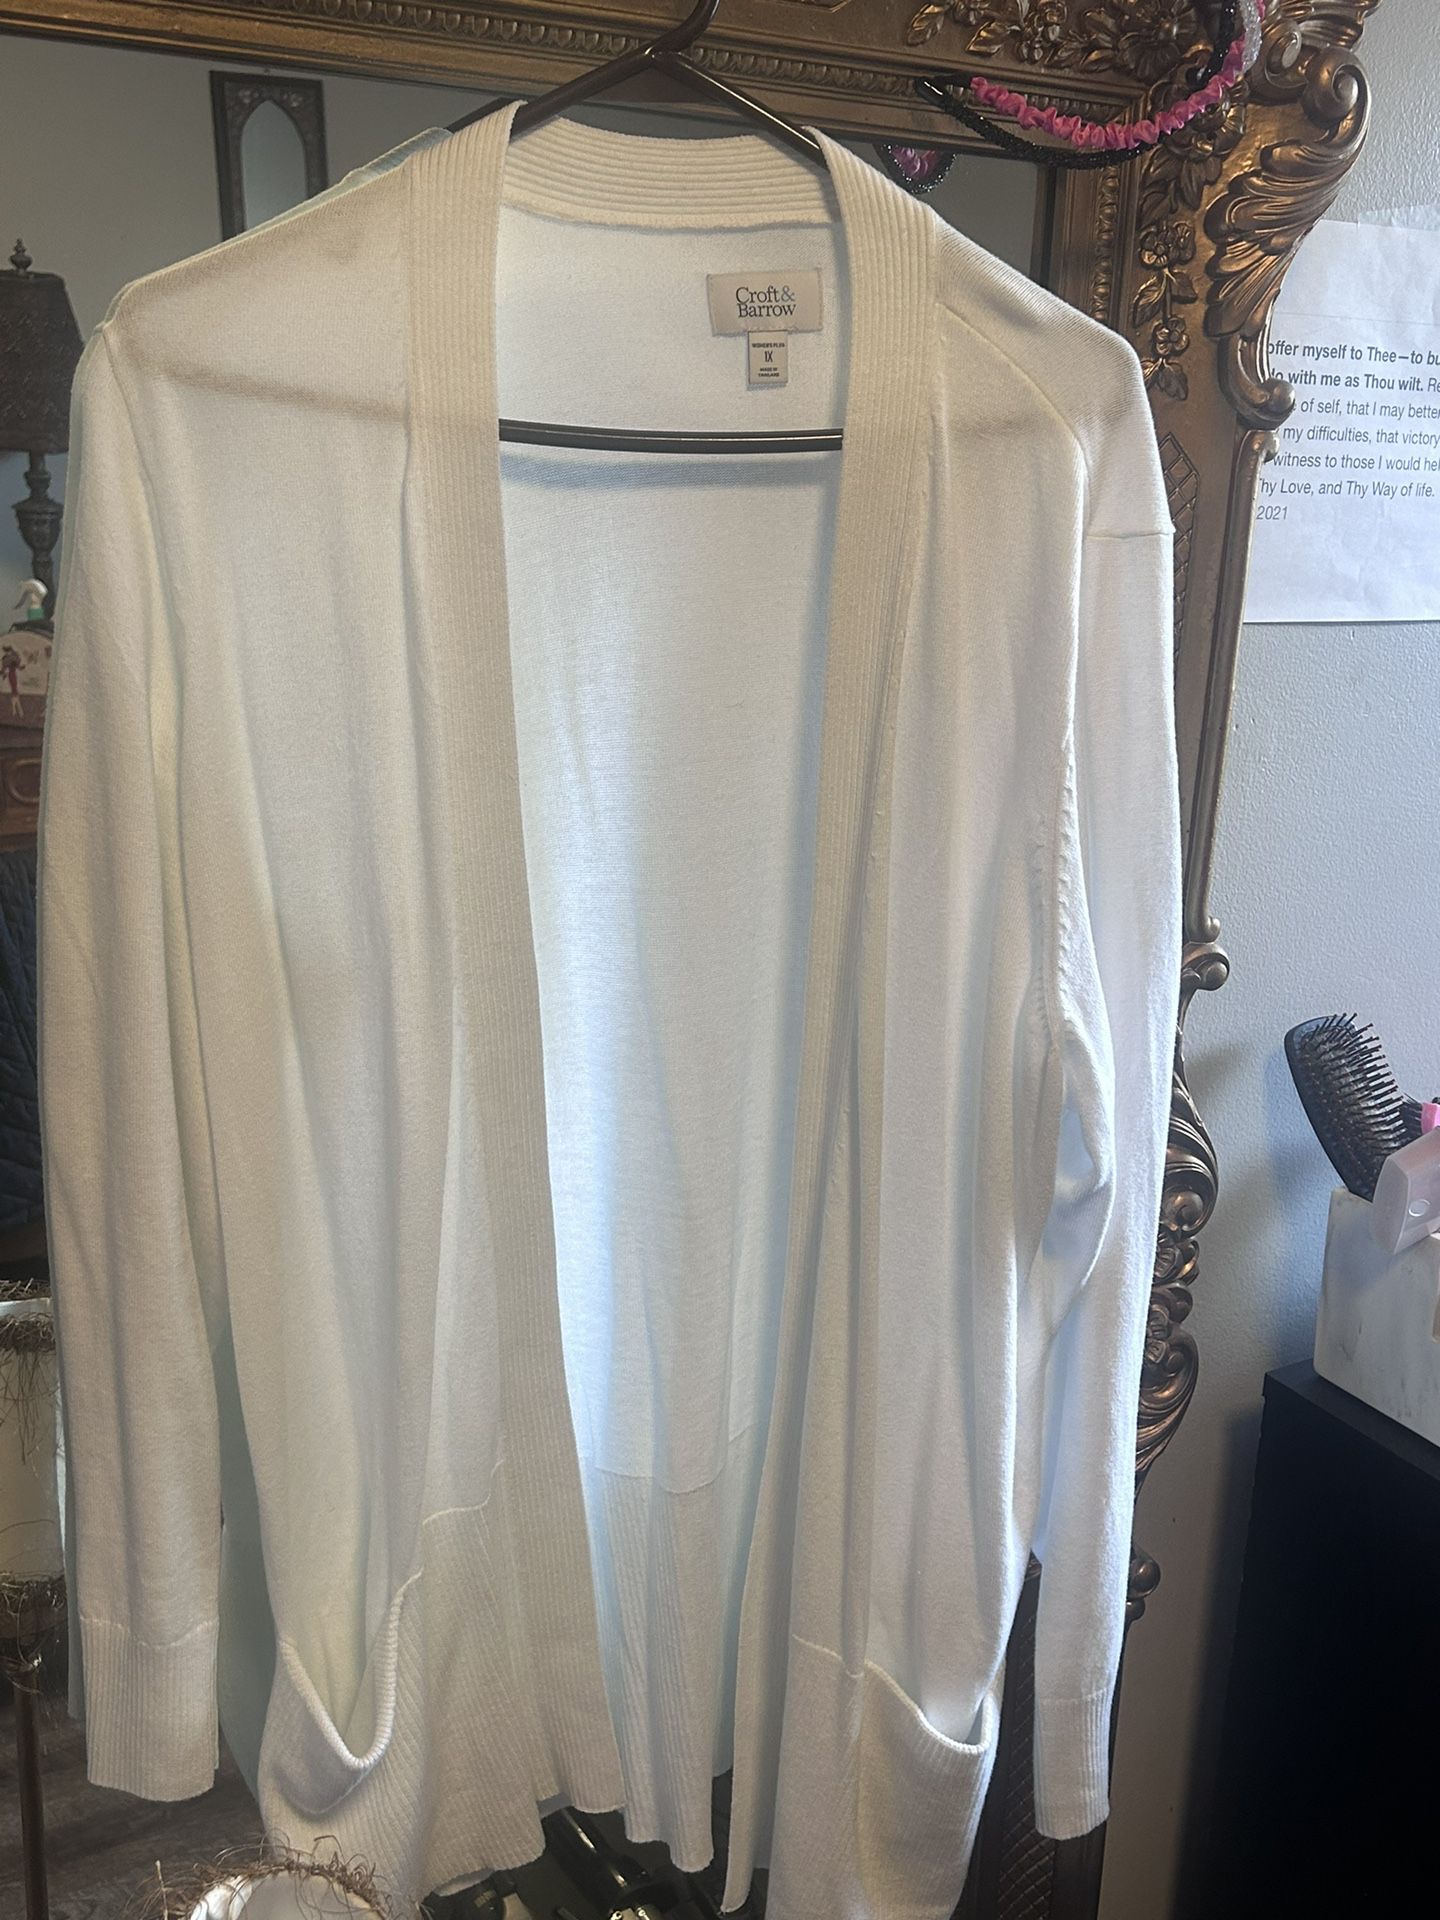 1x New No Tags. White Cardigan Open Front  Croft And Barrow Brand 